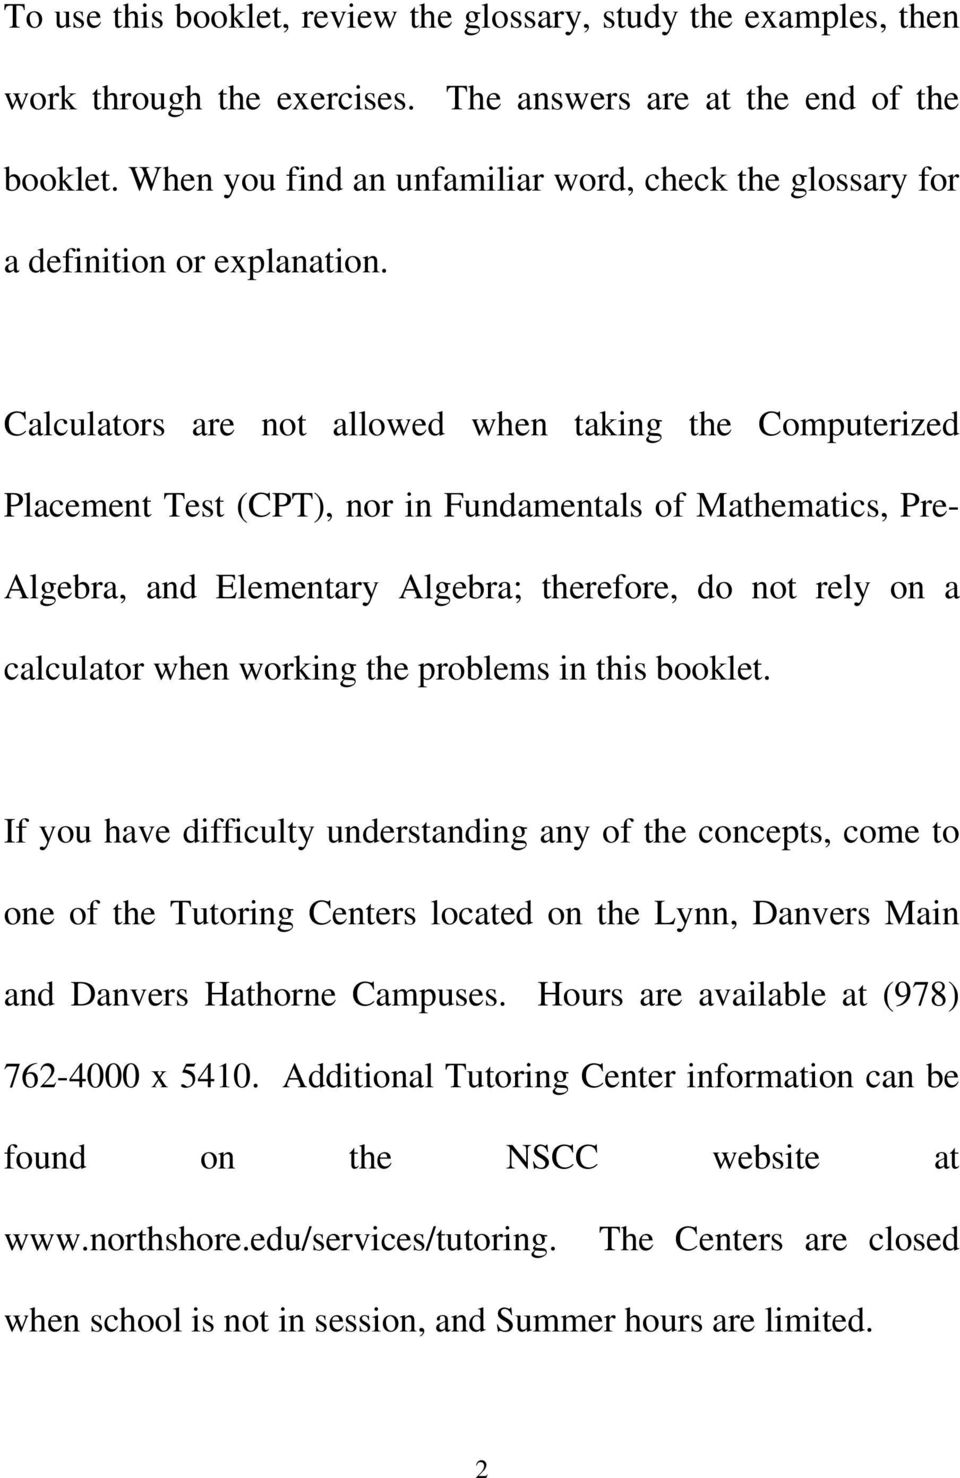 Calculators are not allowed when taking the Computerized Placement Test (CPT), nor in Fundamentals of Mathematics, Pre- Algebra, and Elementary Algebra; therefore, do not rely on a calculator when